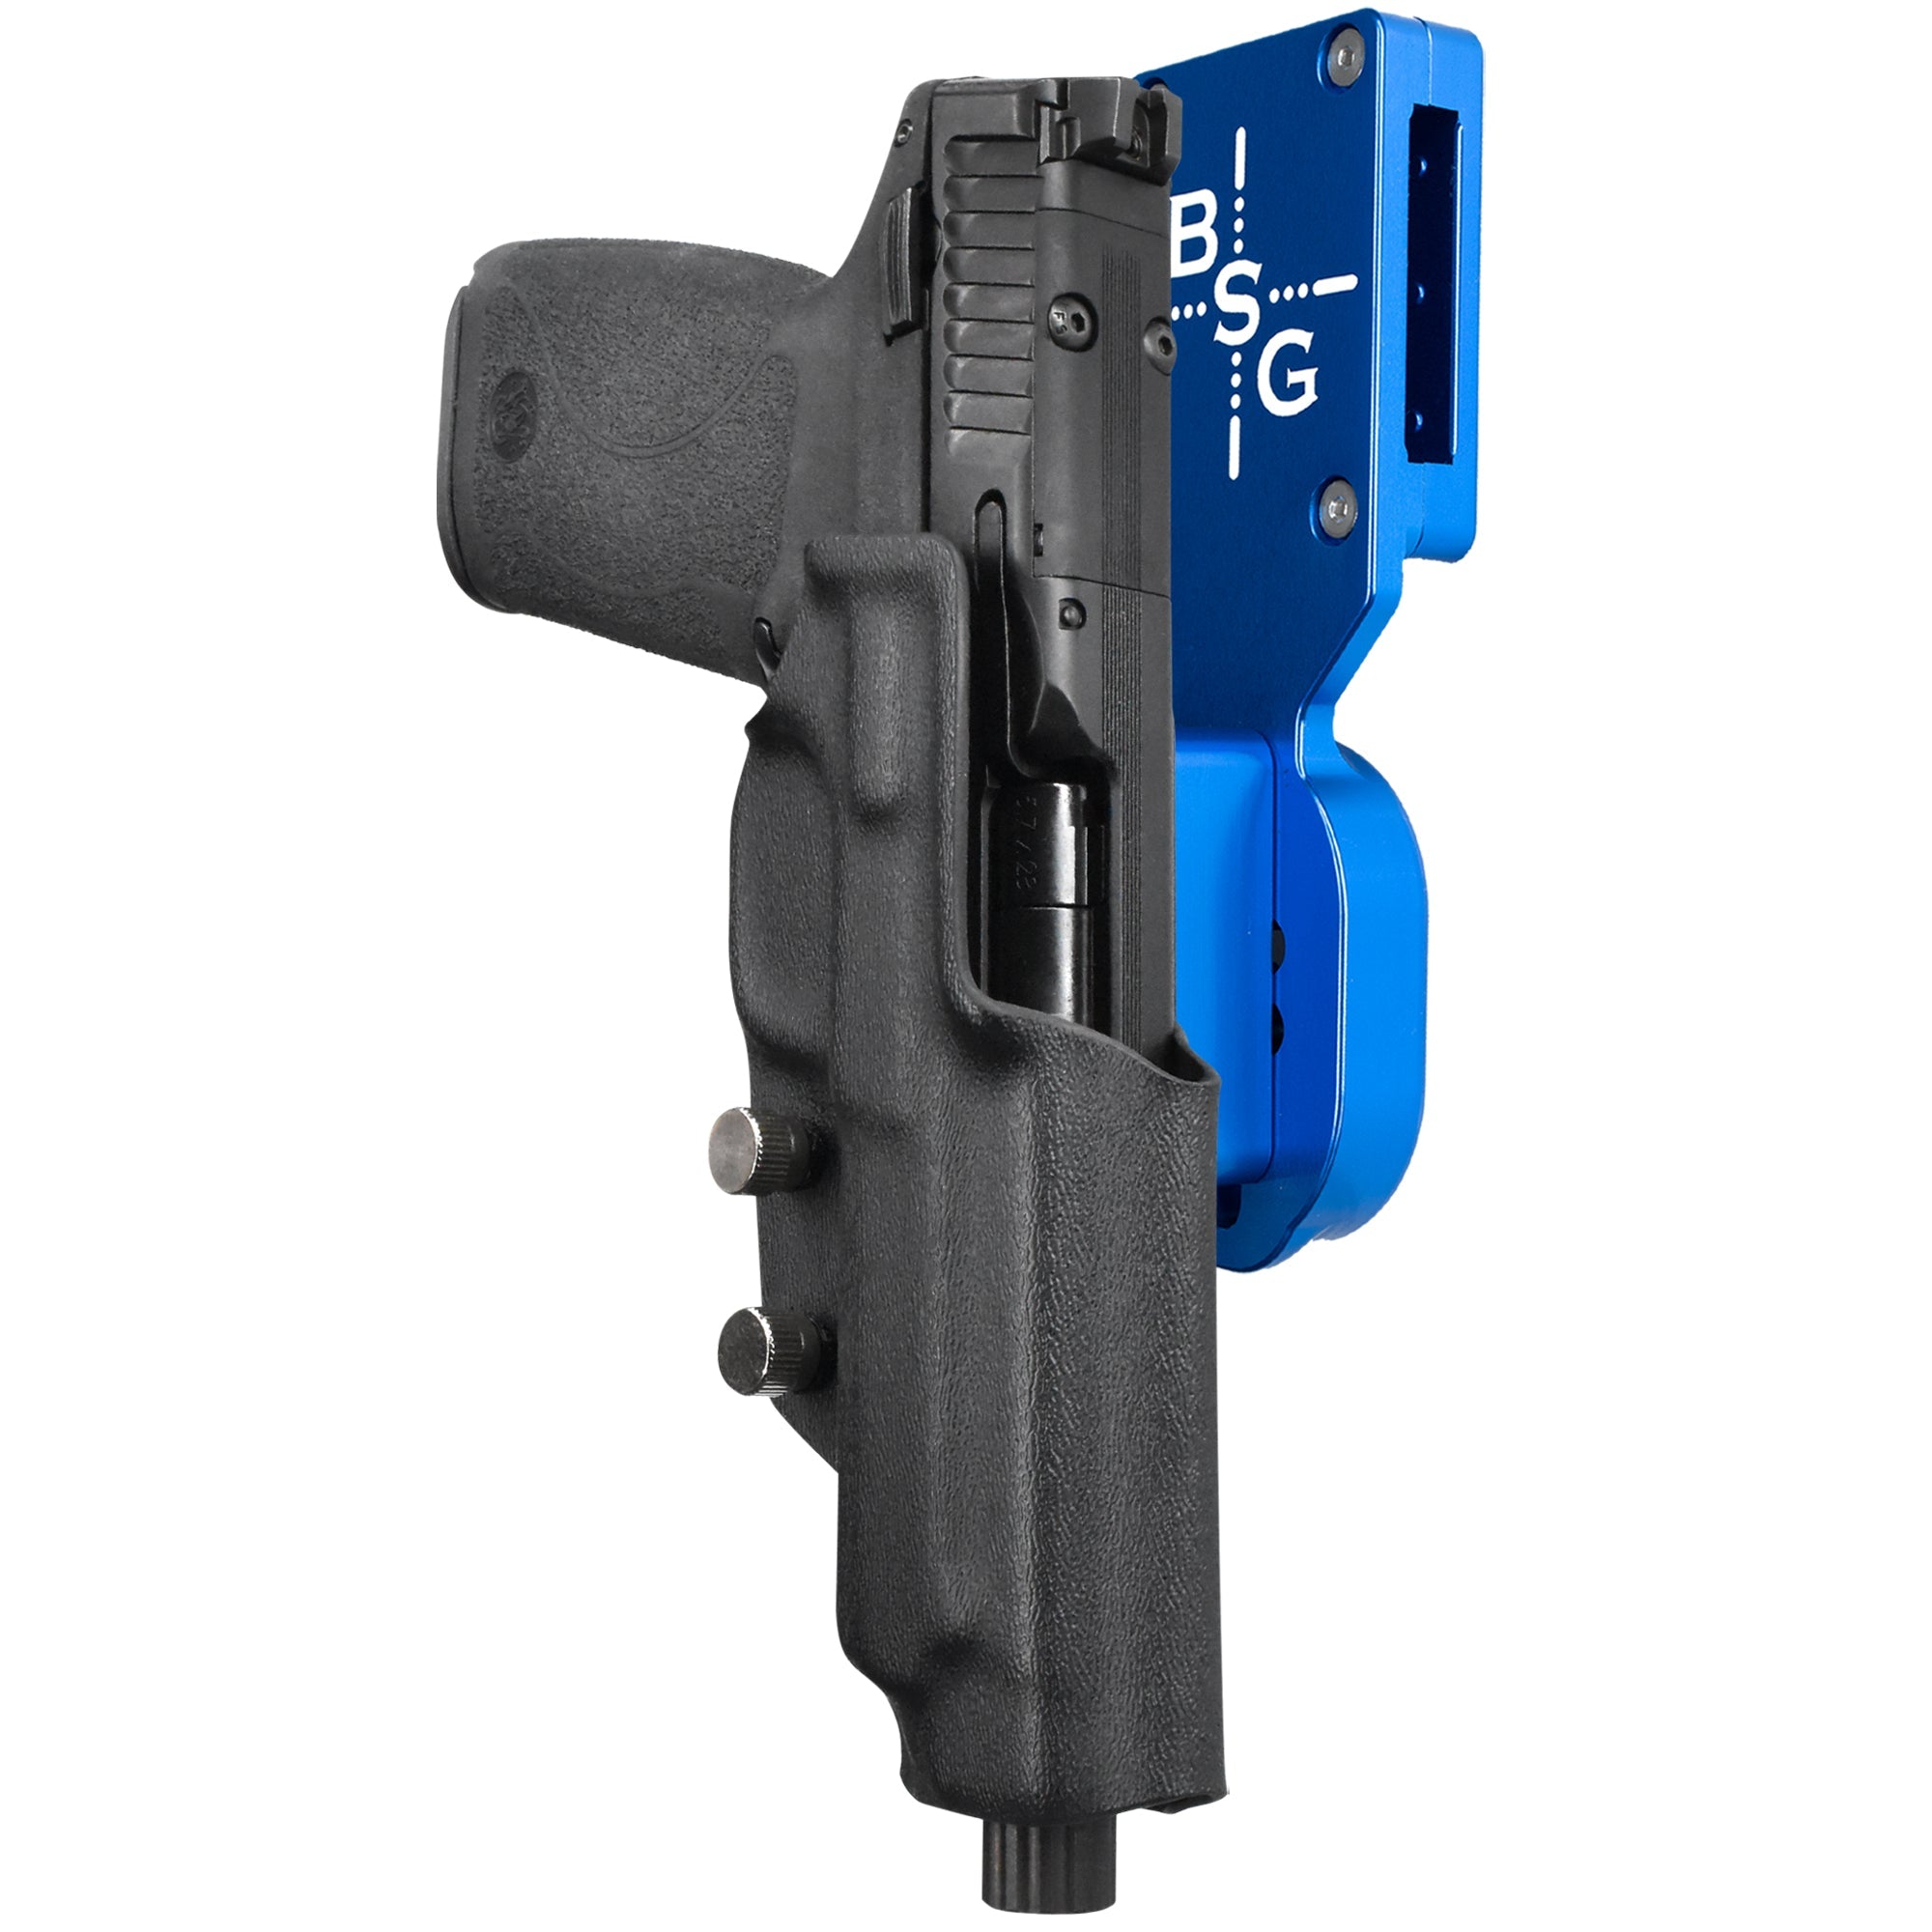 Smith and Wesson M&P 5.7 Pro Heavy Duty Competition Holster in Blue / Black